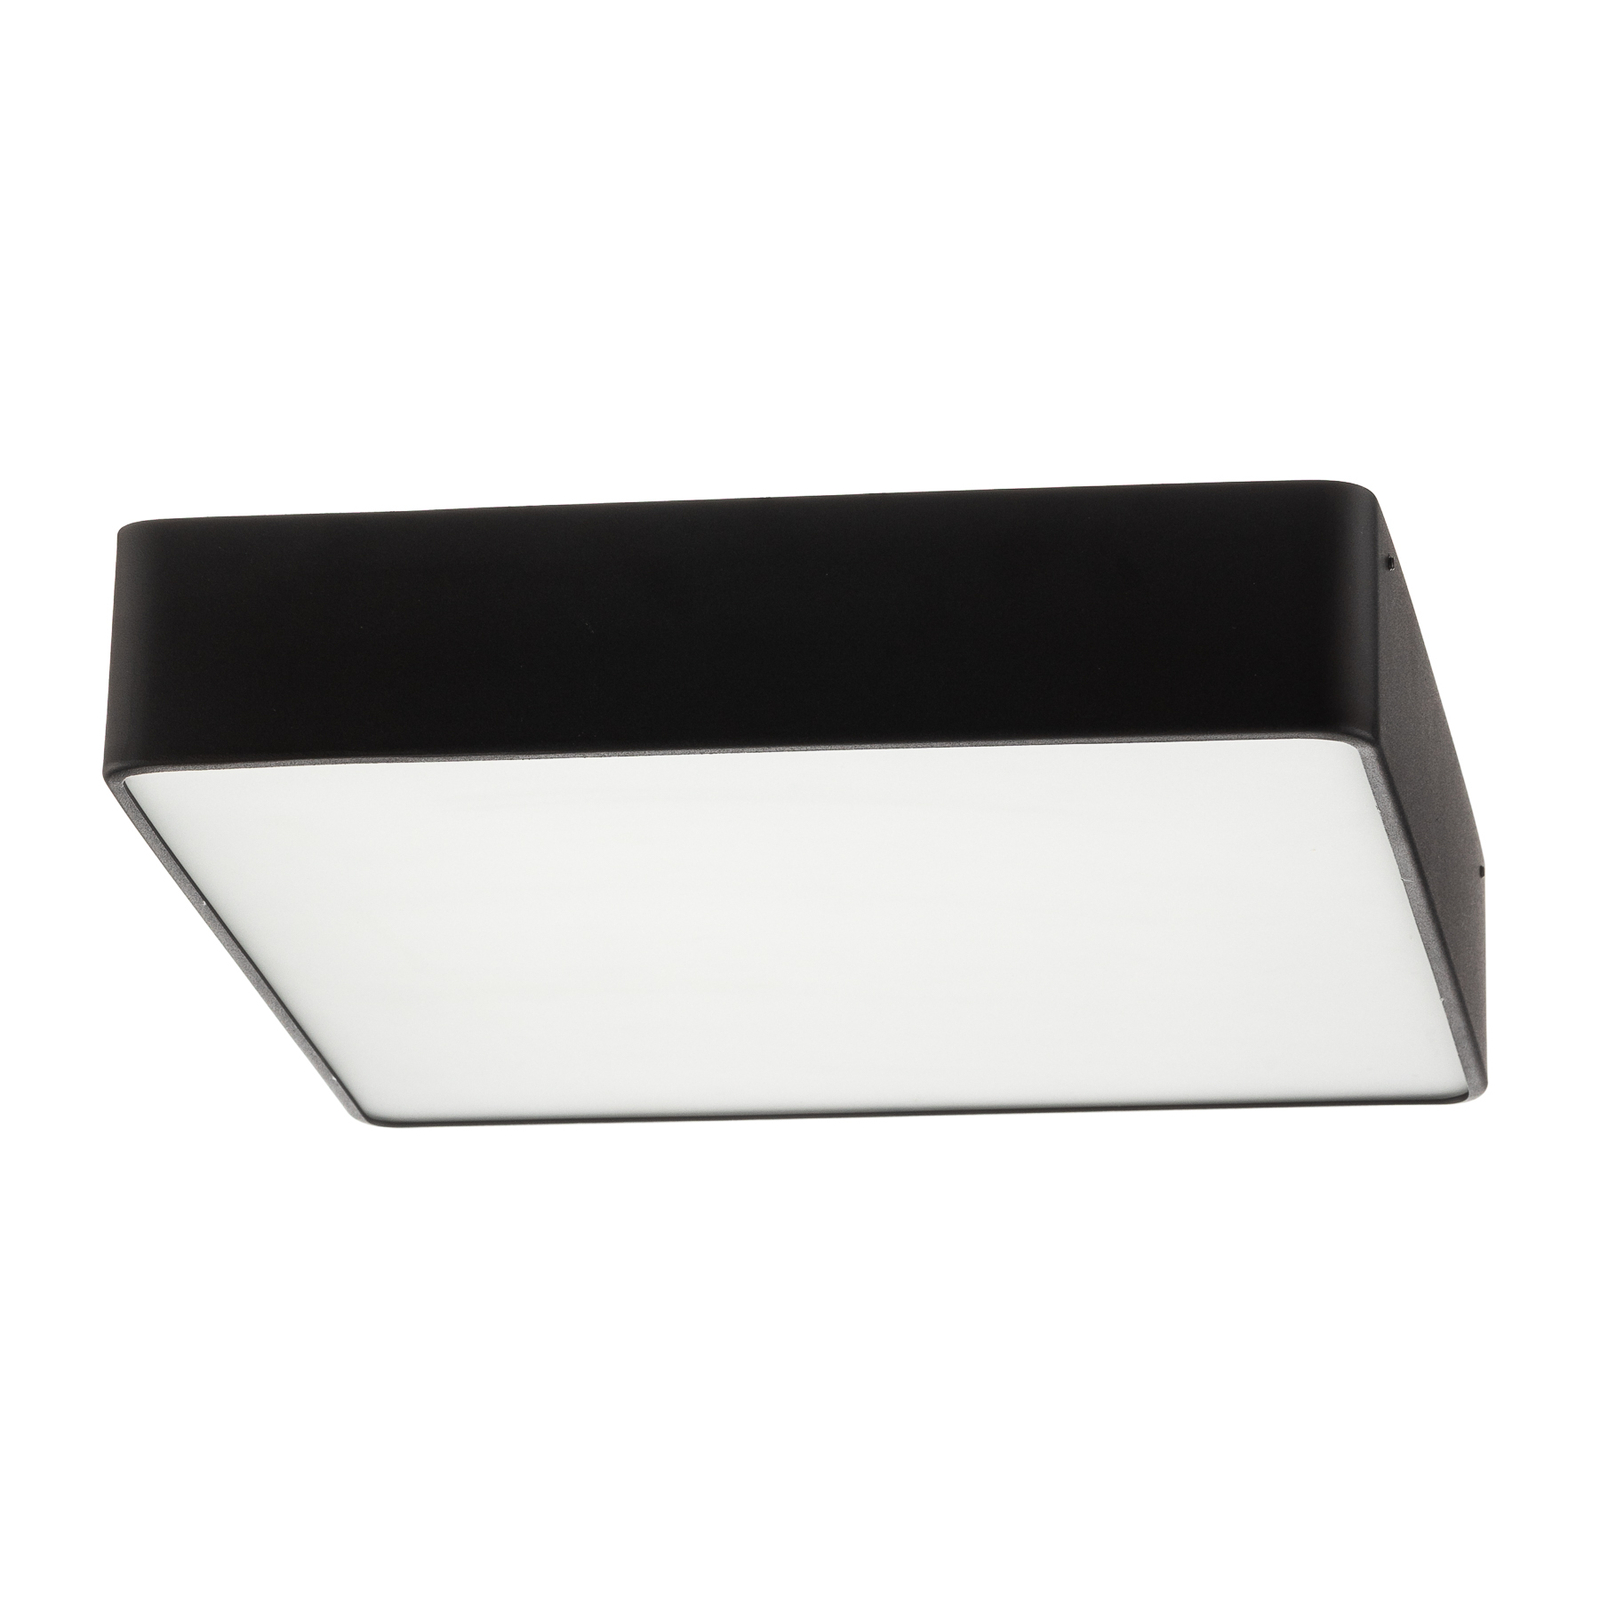 Oro ceiling lamp made of steel and glass, black, 35cm